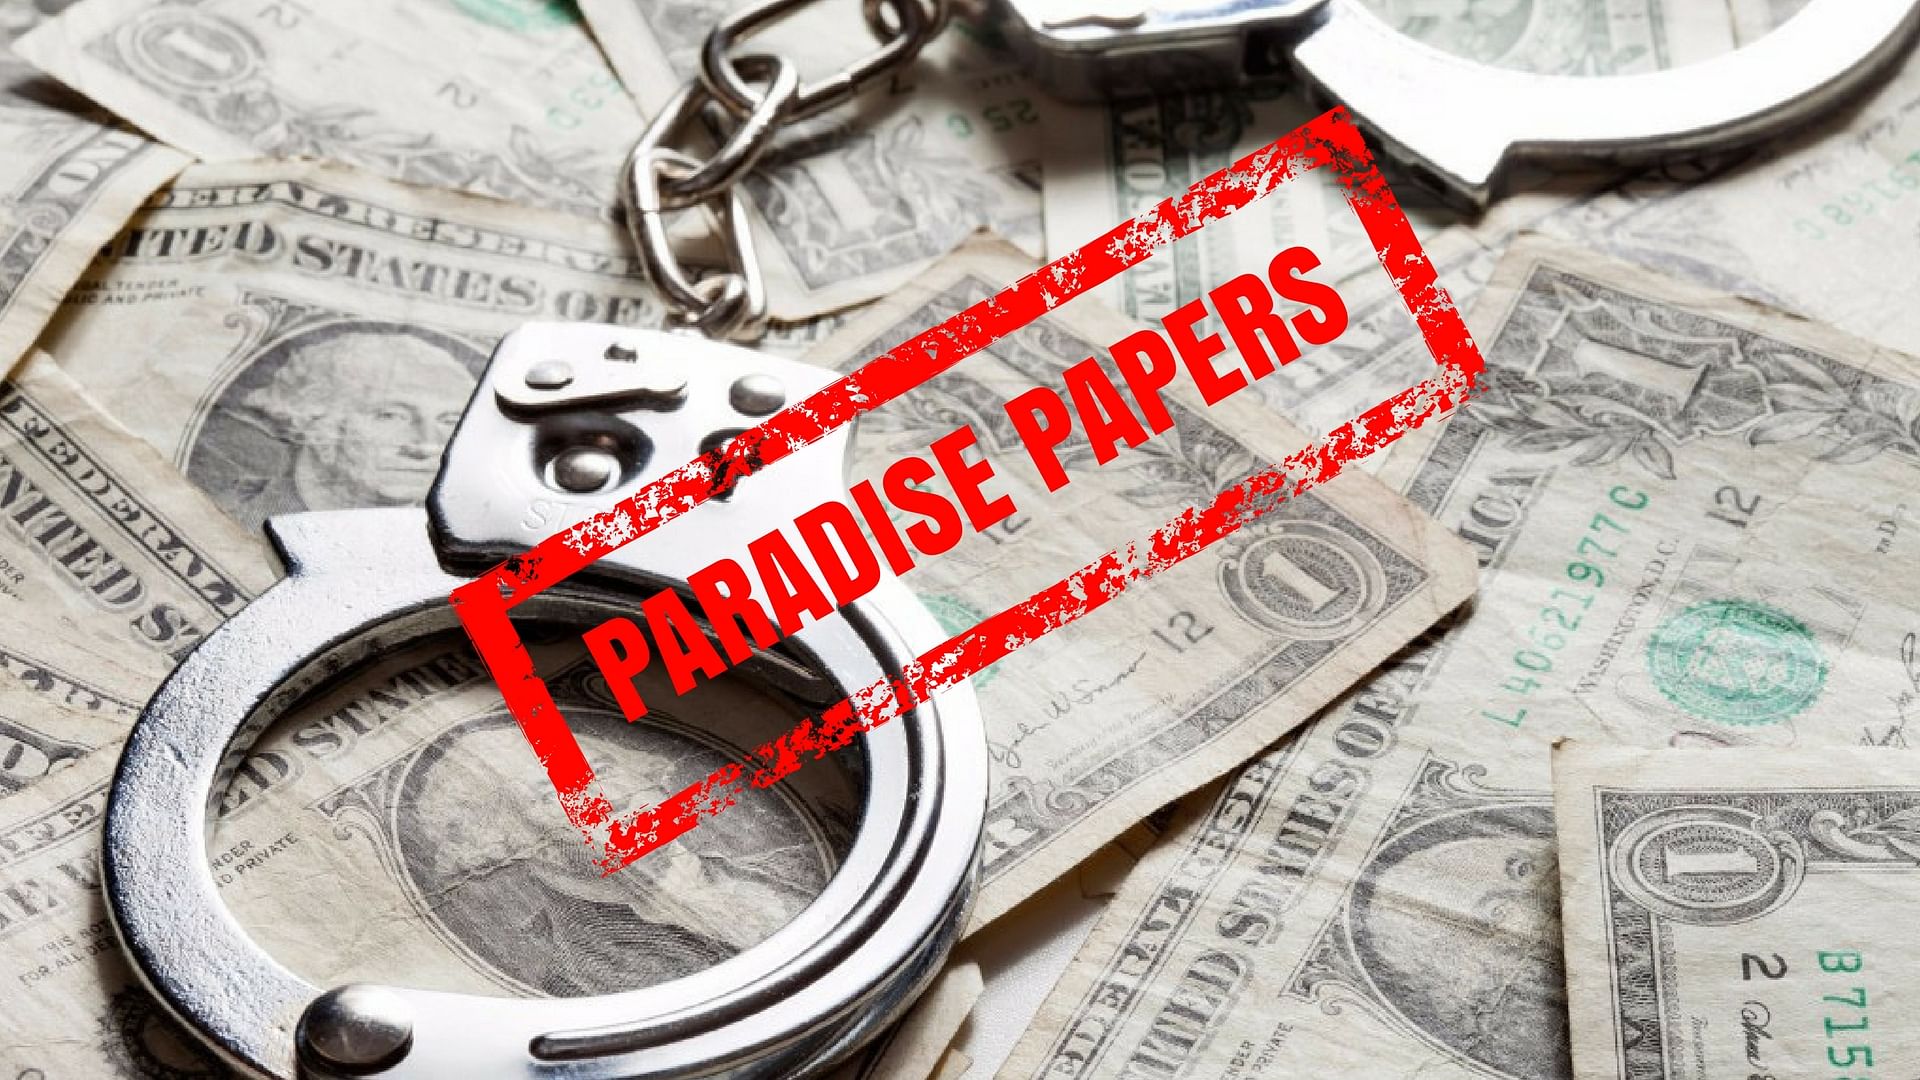 The multi-agency group, constituted in 2016 to investigate the legality of money stashed offshore by Indians named in the Panama Papers, will probe the Paradise Papers as well